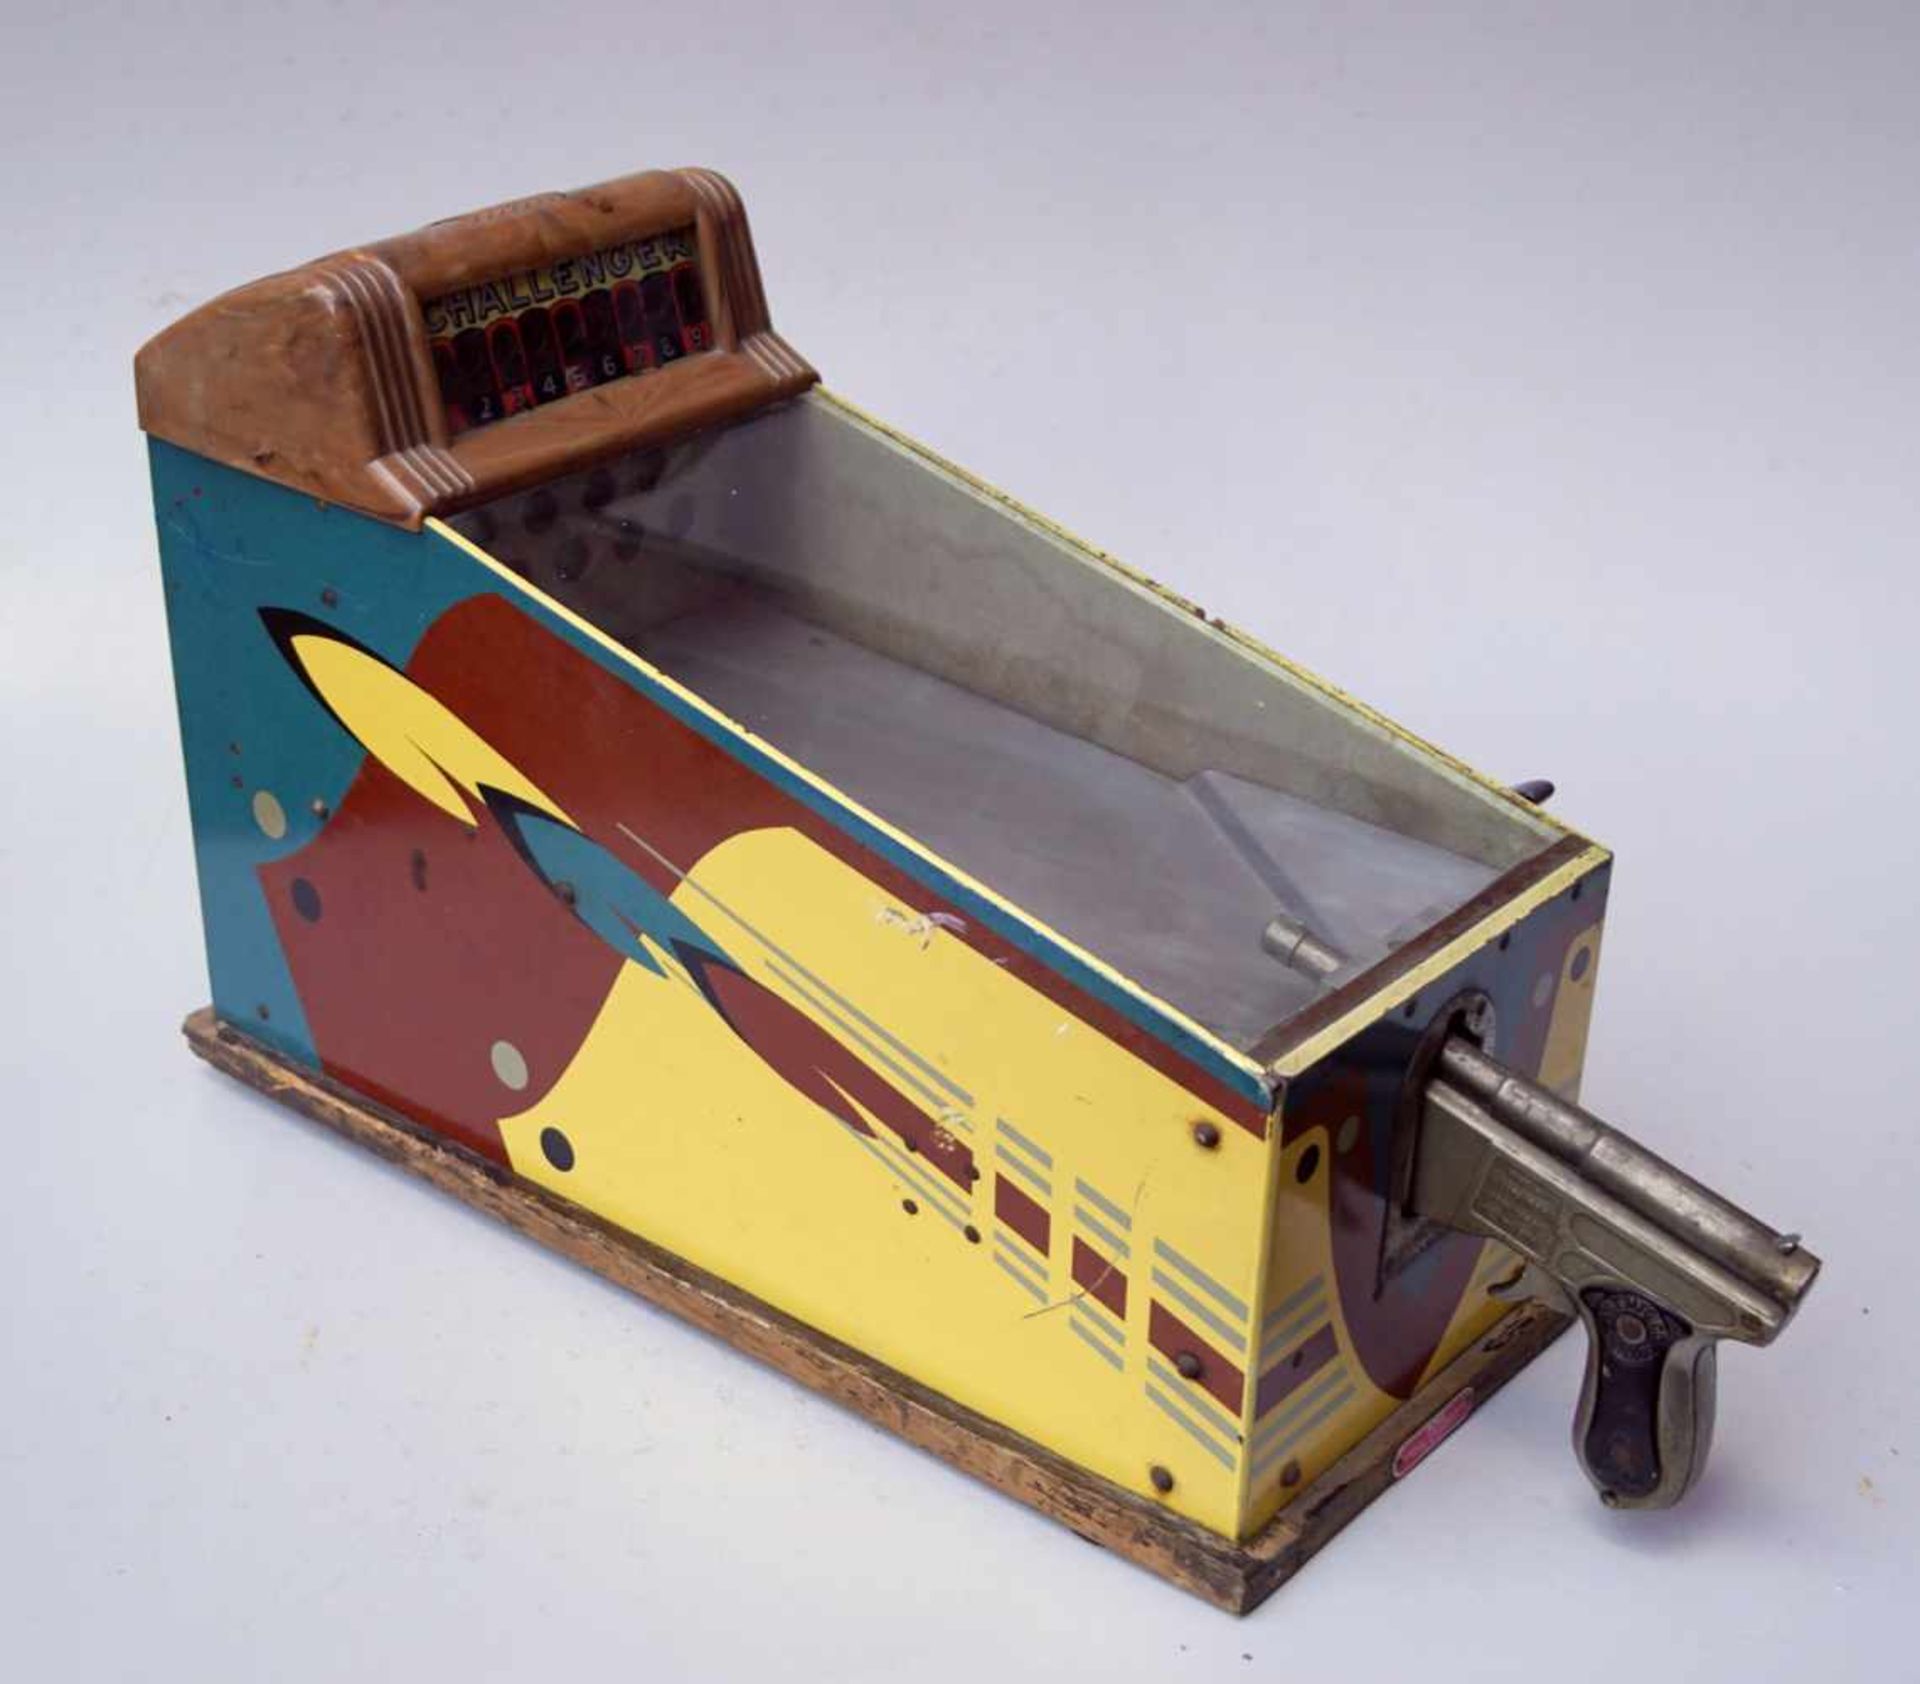 ABT.MFG&Co, Chicago: "Challenger" Pistol Shooting Game, v. W.A.Tratsch, USA um 1940 - Image 4 of 5